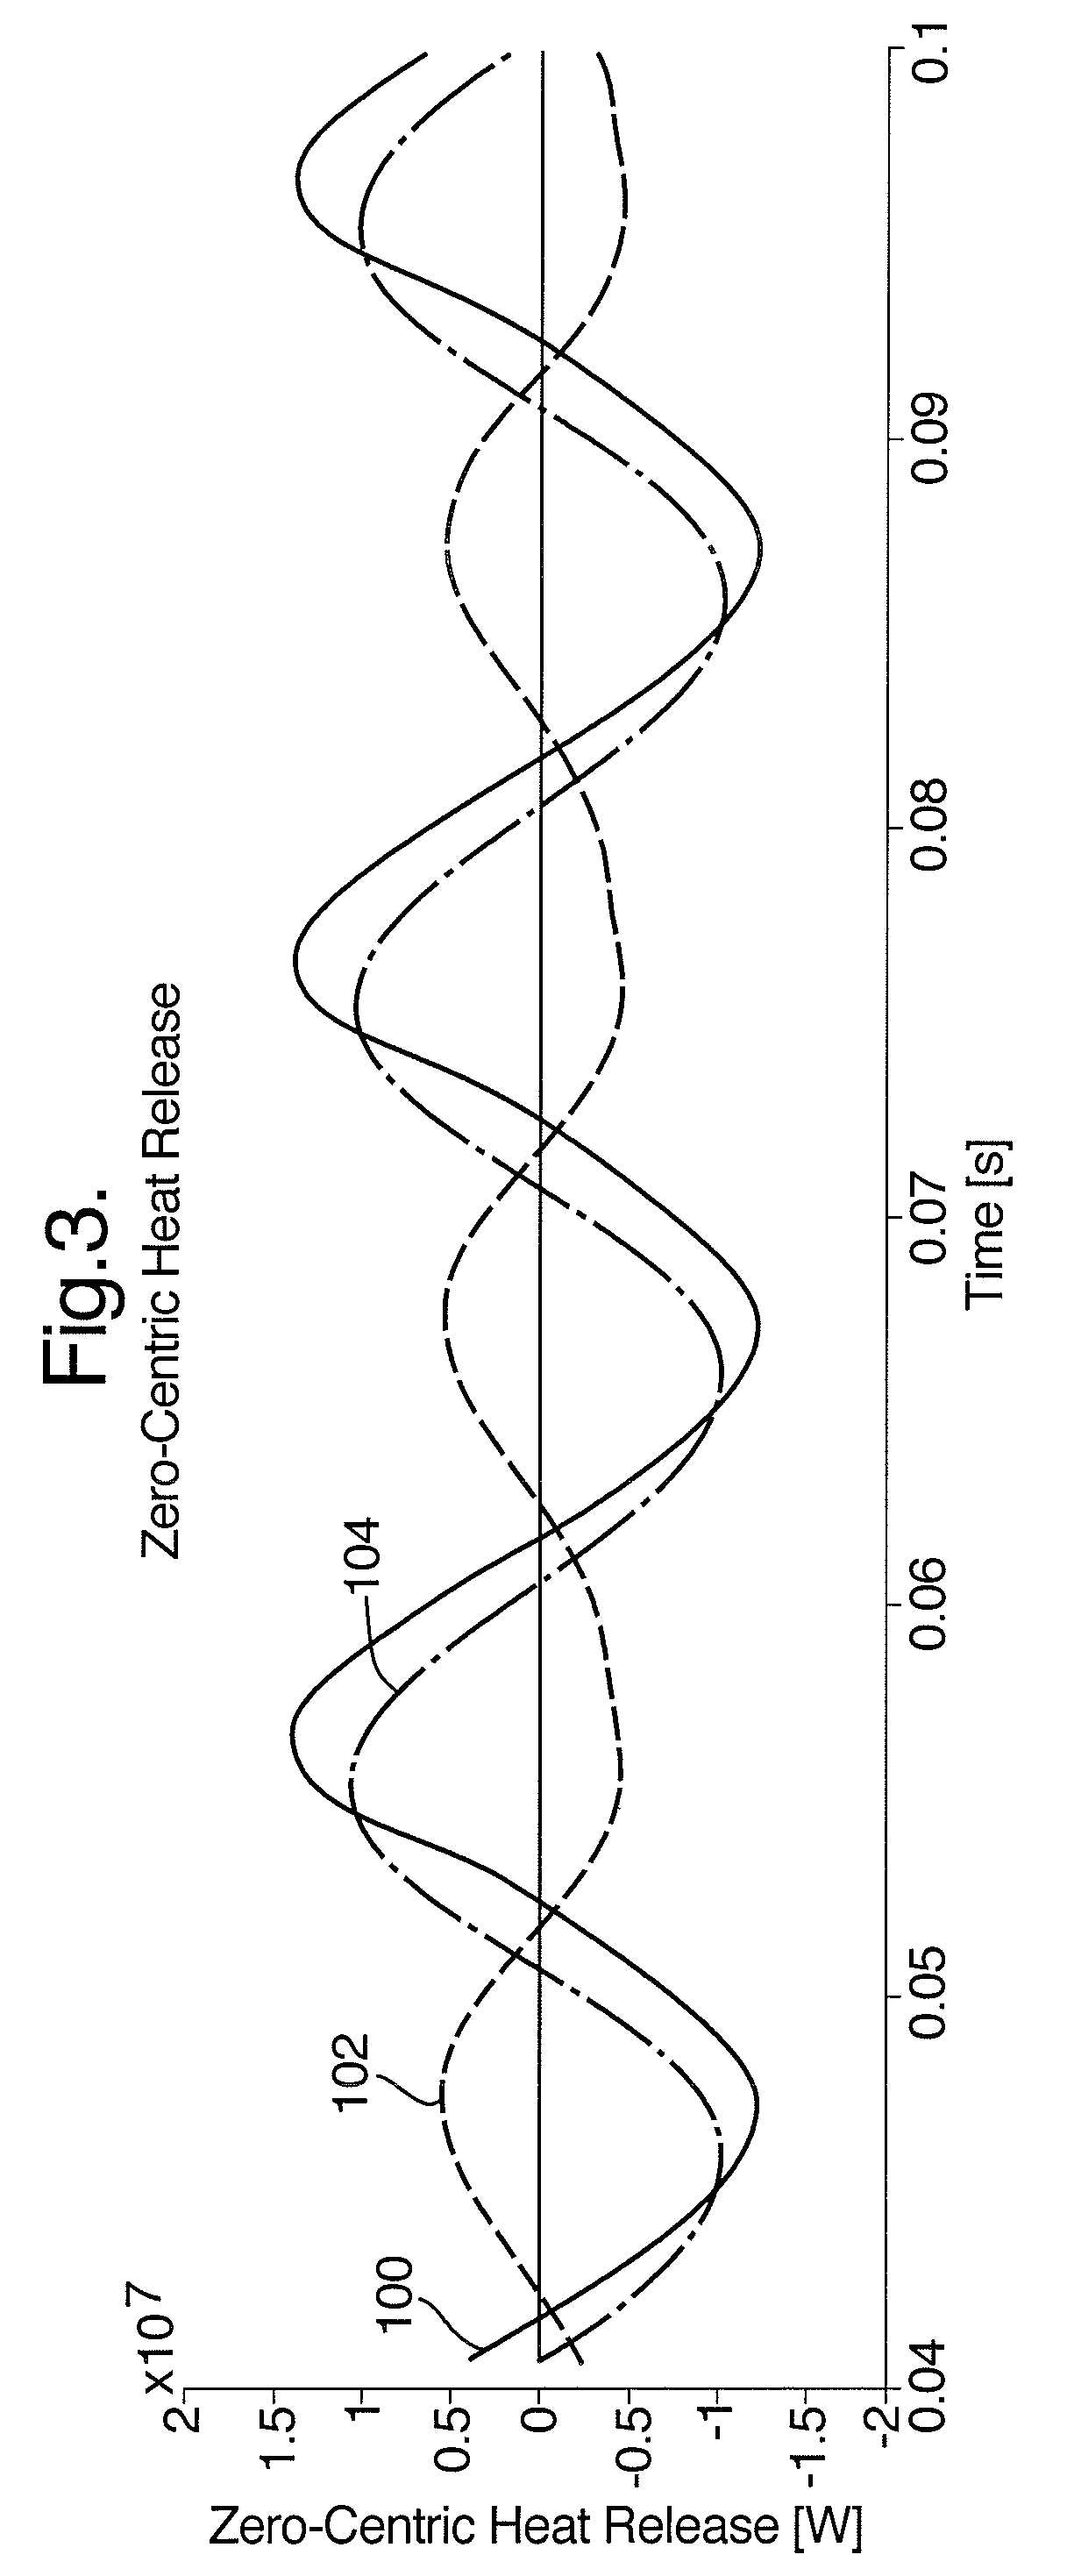 Combustion control for a gas turbine